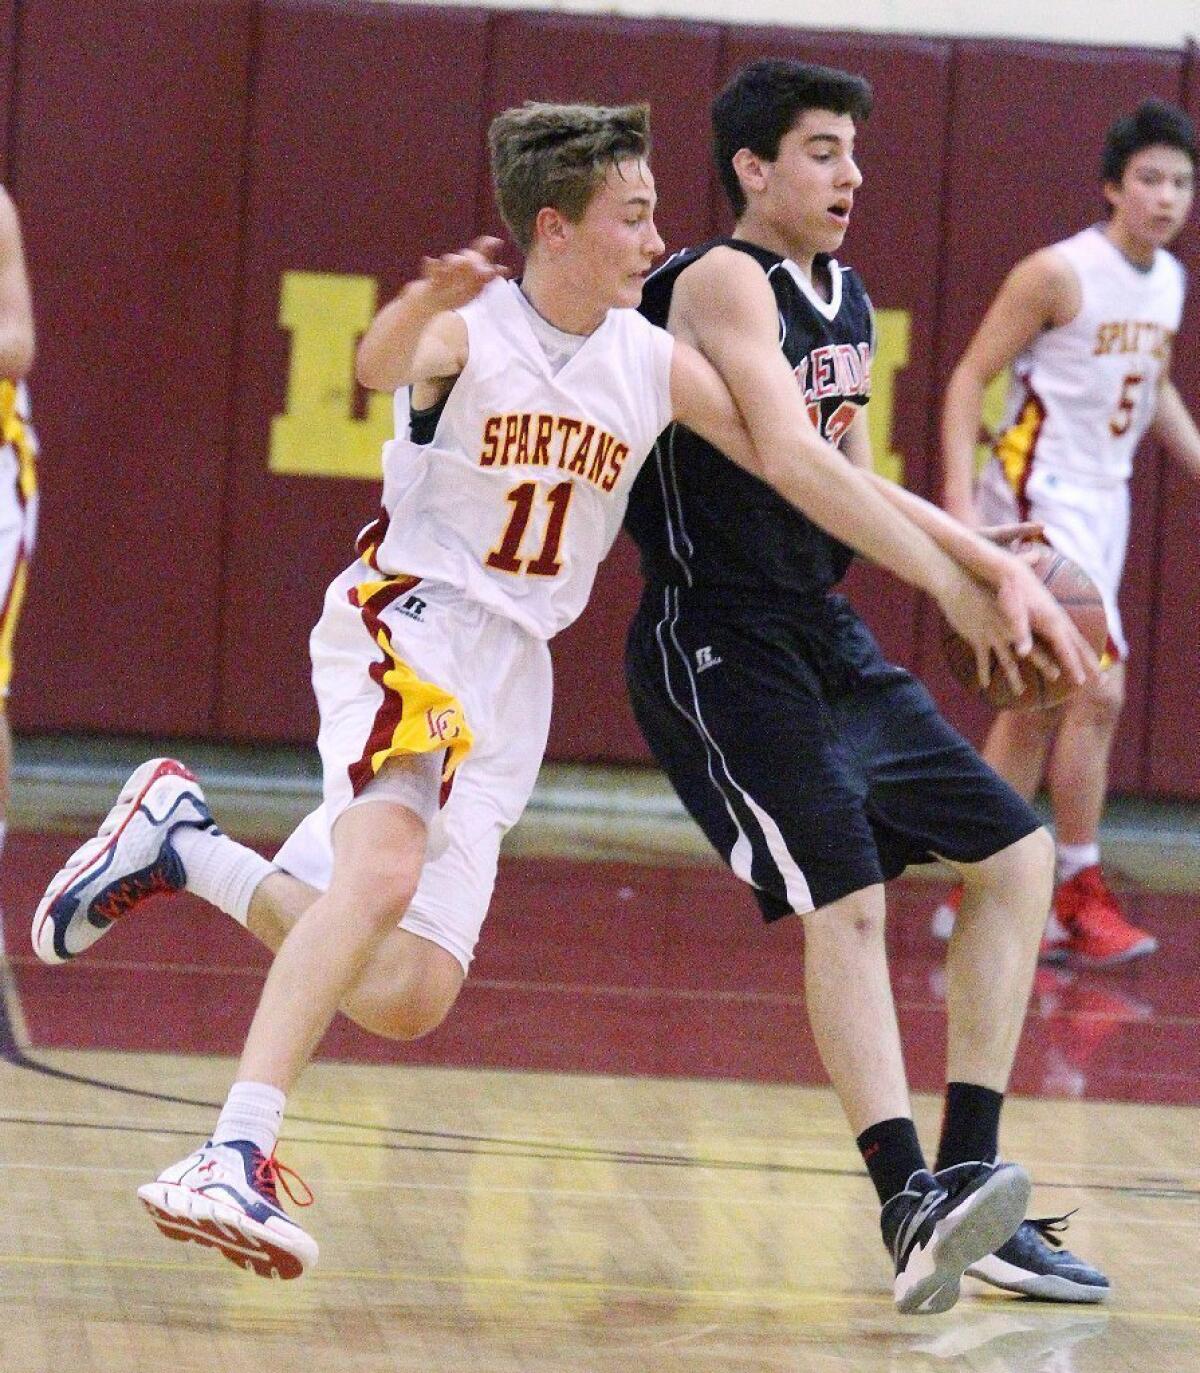 La Cañada's Grant Arthur commits a foul chasing the ball around Glendale's Raffi Jivalagian in the La Cañada Holiday Classic boys' basketball tournament on Tuesday.